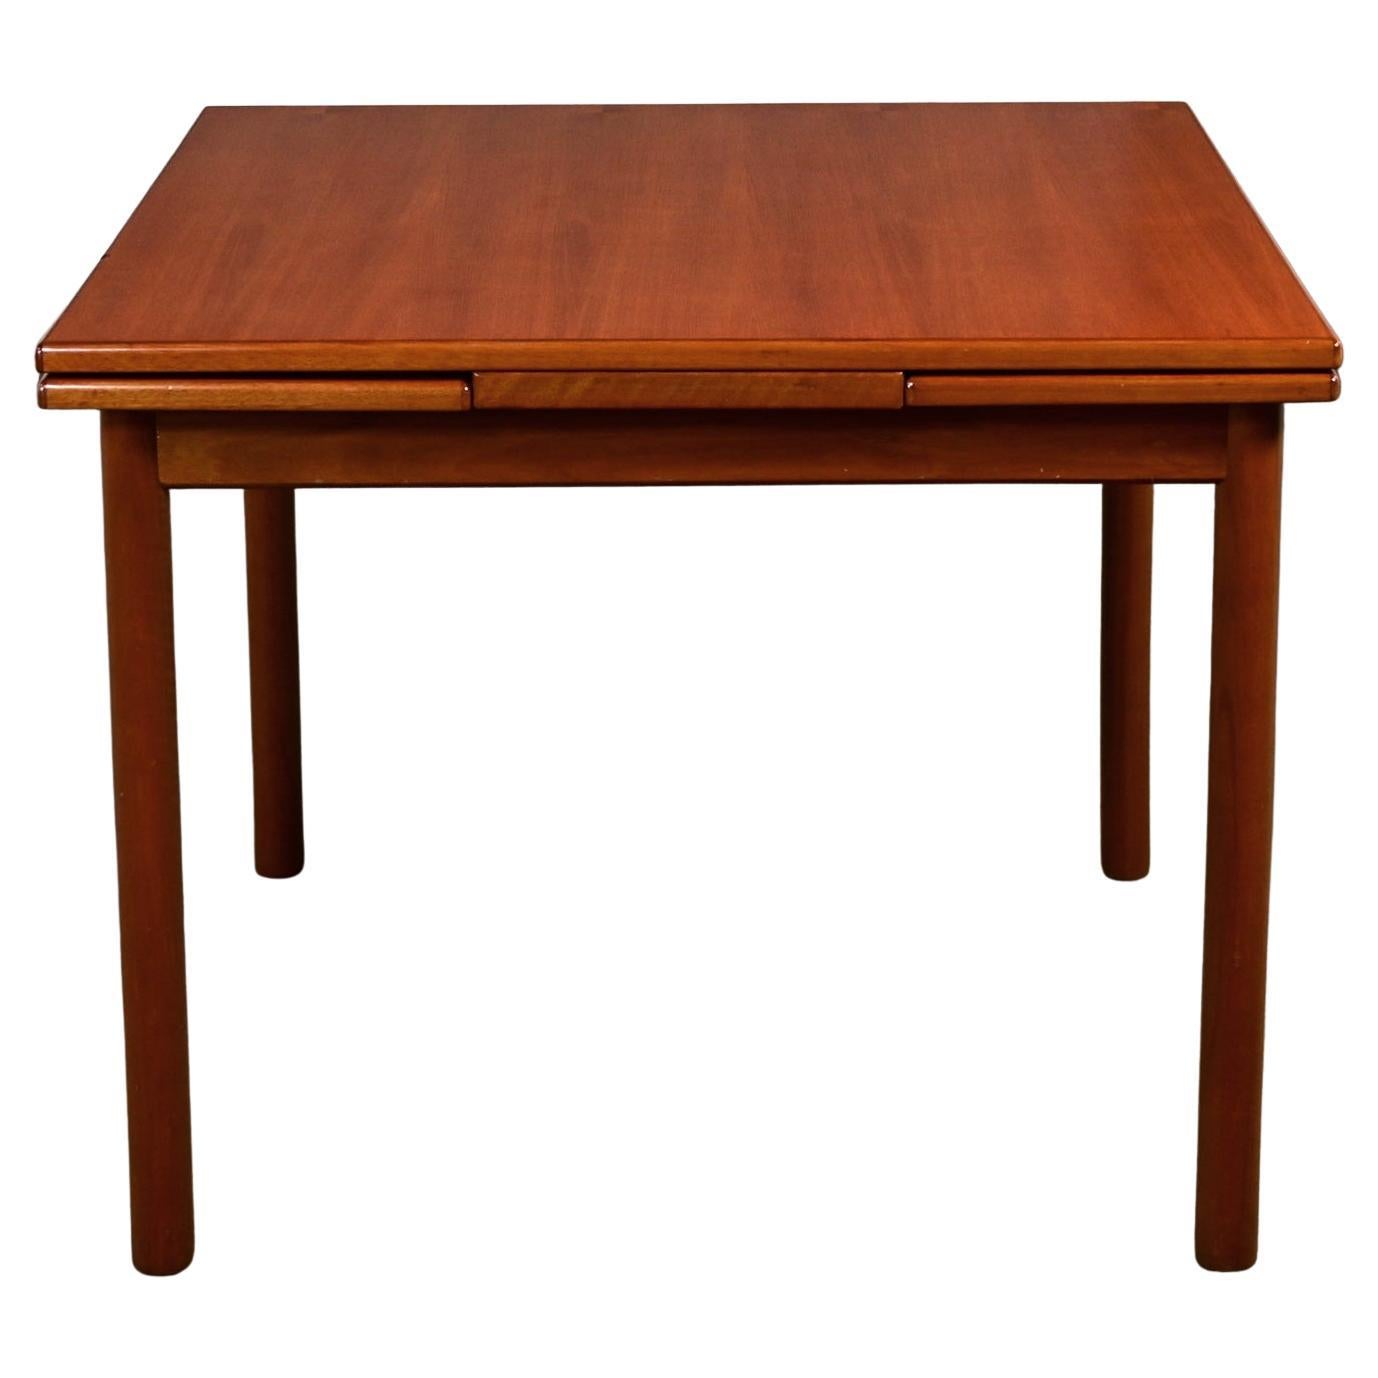 Scandinavian Modern Style Teak Square Extension Dining Table Made in Singapore For Sale